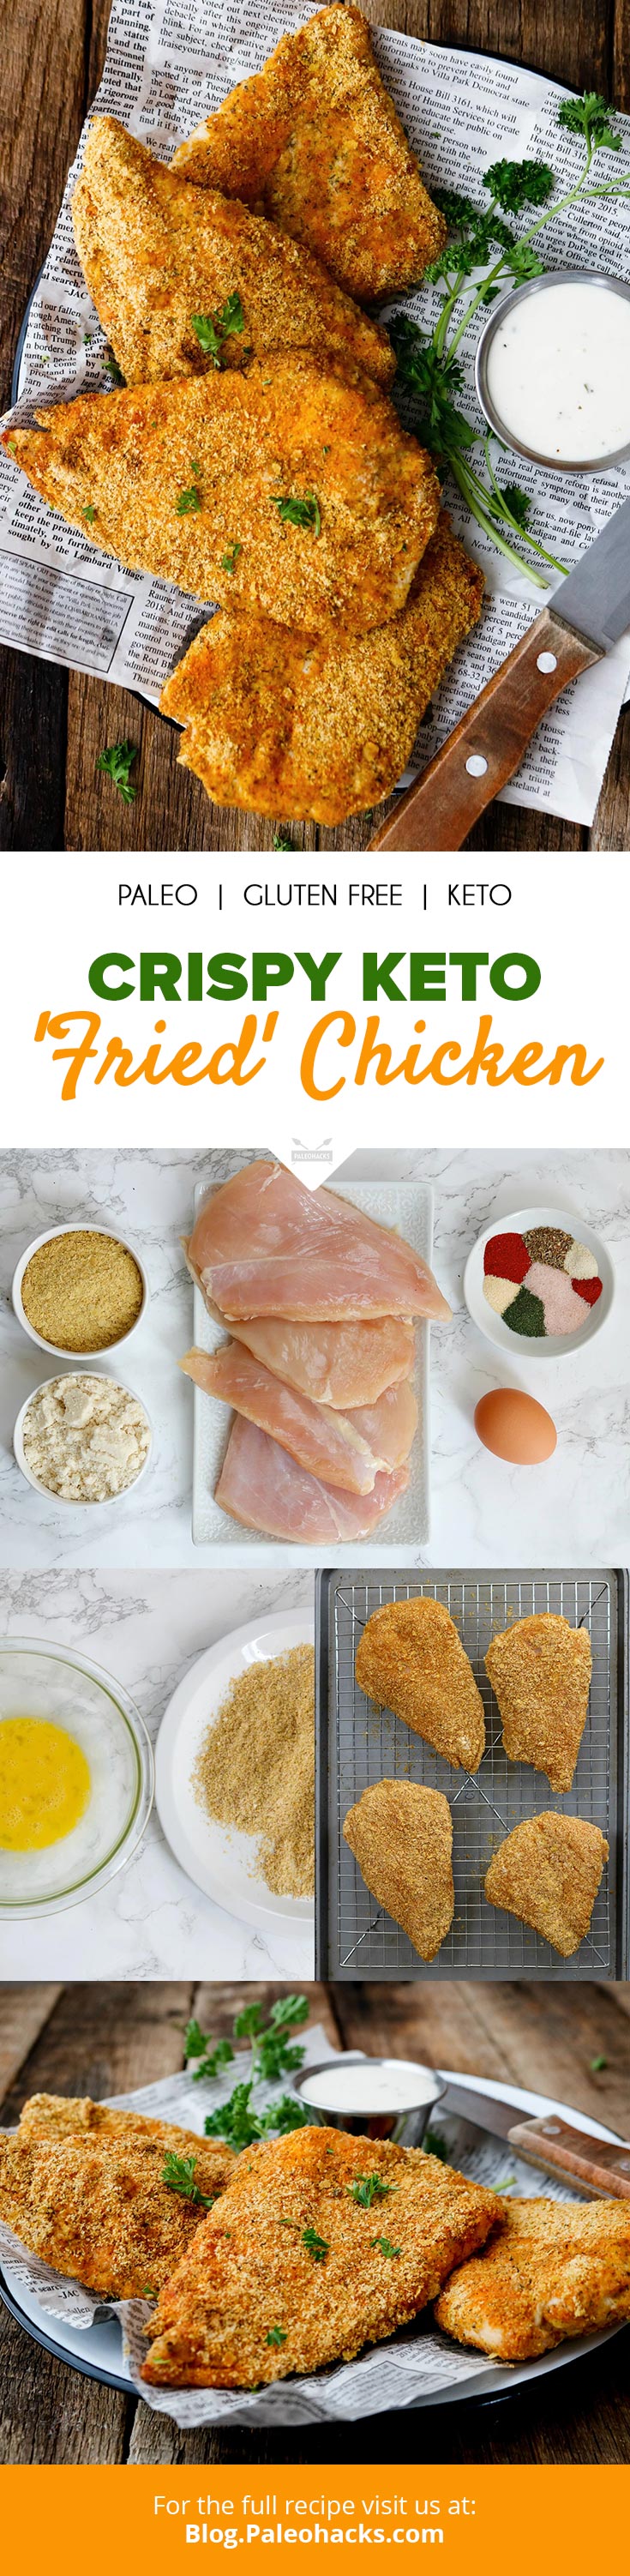 Skip the carbs, and bite into this crispy, keto-approved “fried” chicken! Chicken doesn’t have to be boring when you’re keto.